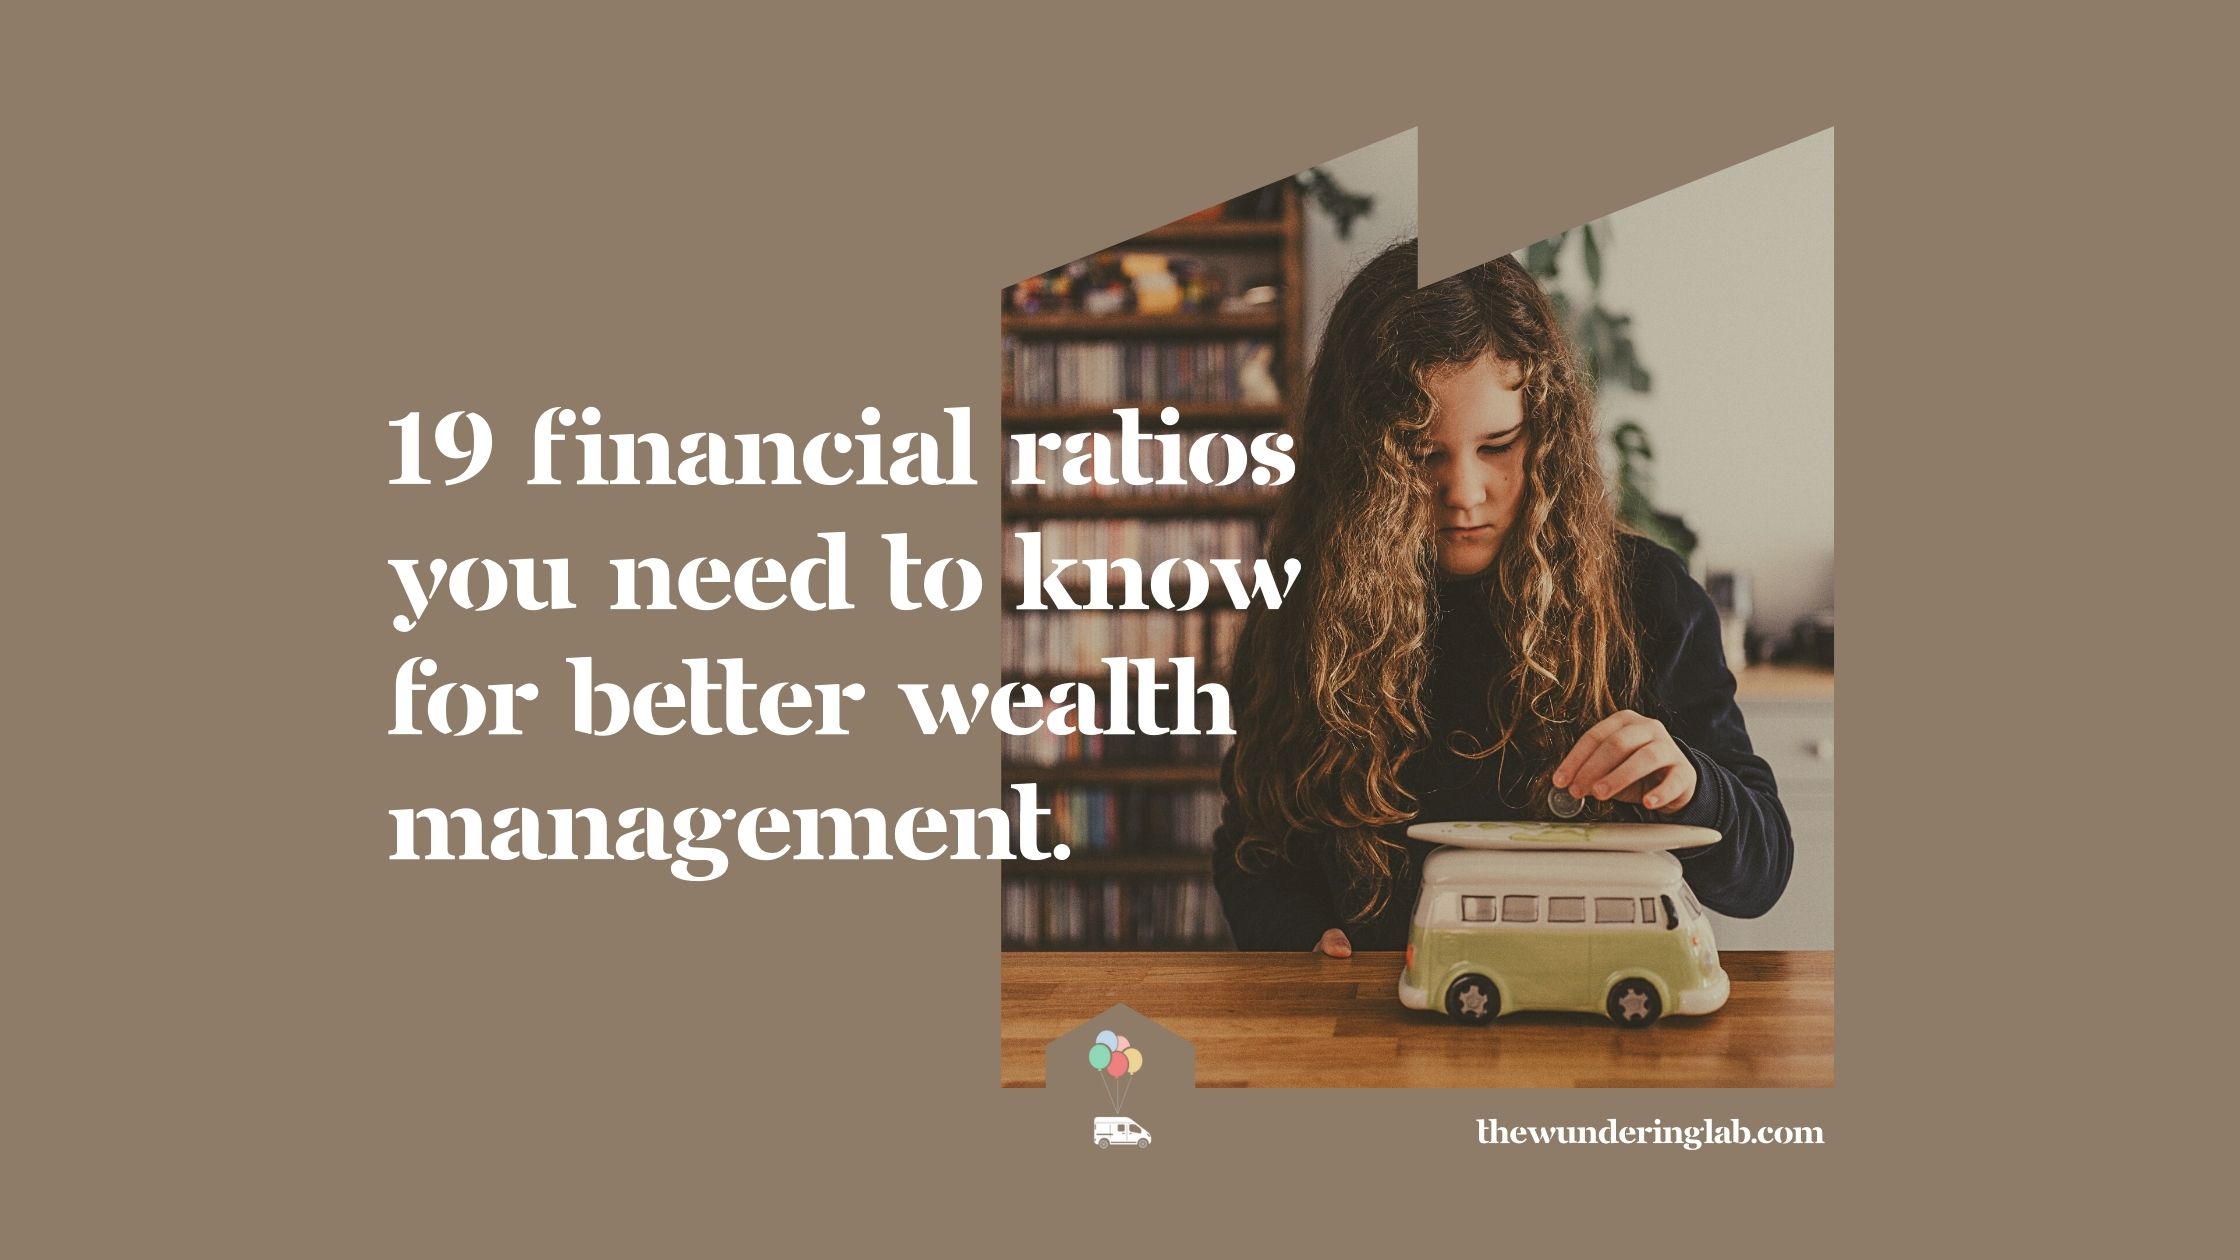 19 financial ratios for better wealth management